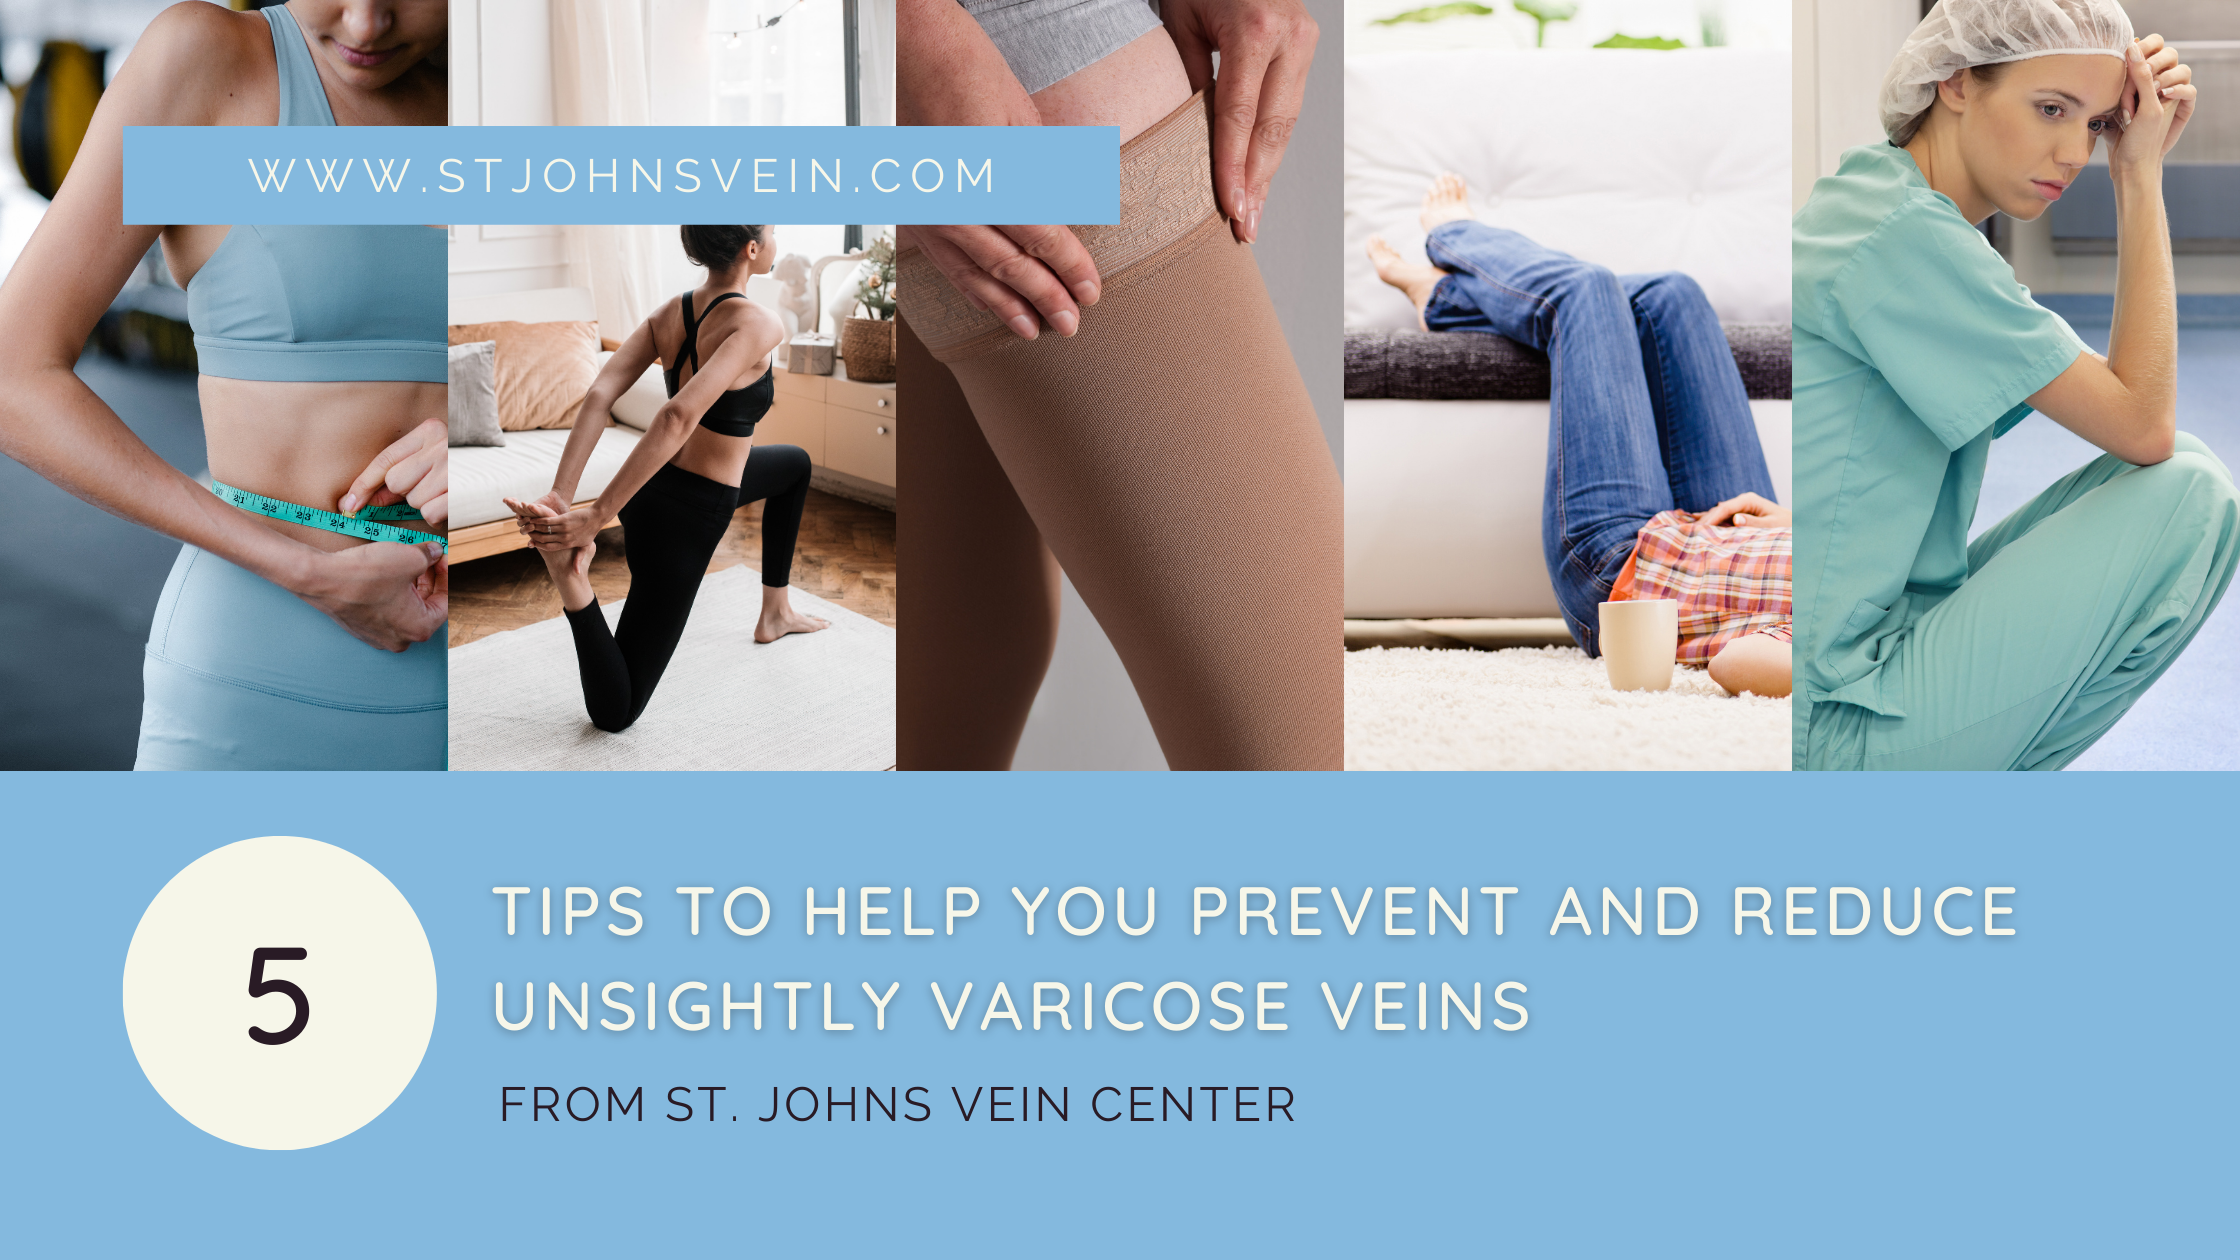 5 Tips To Help You Prevent And Reduce Unsightly Varicose Veins